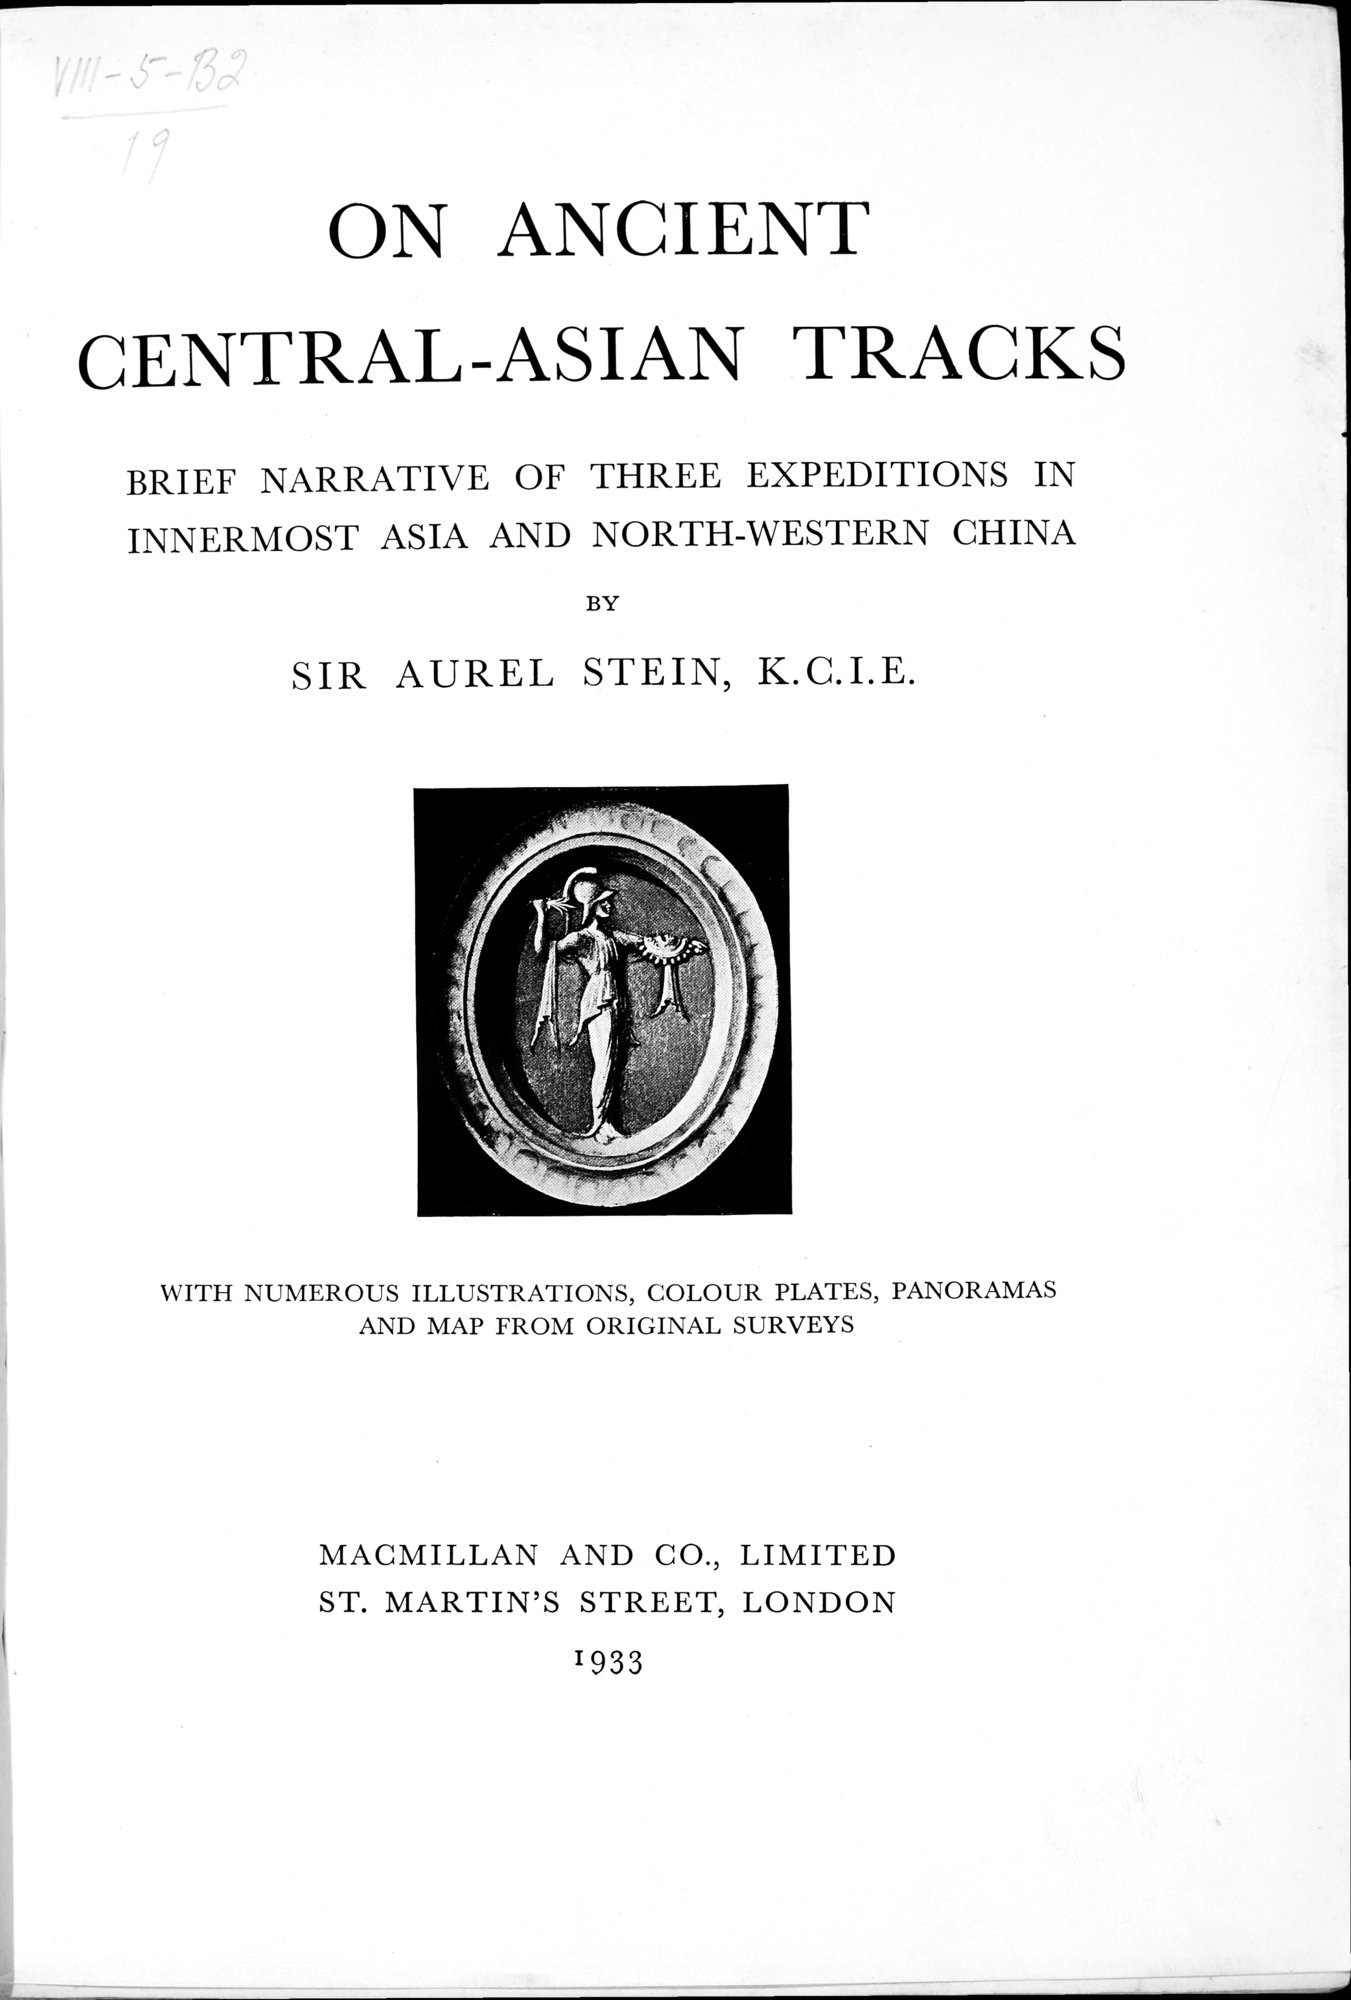 On Ancient Central-Asian Tracks : vol.1 / Page 13 (Grayscale High Resolution Image)